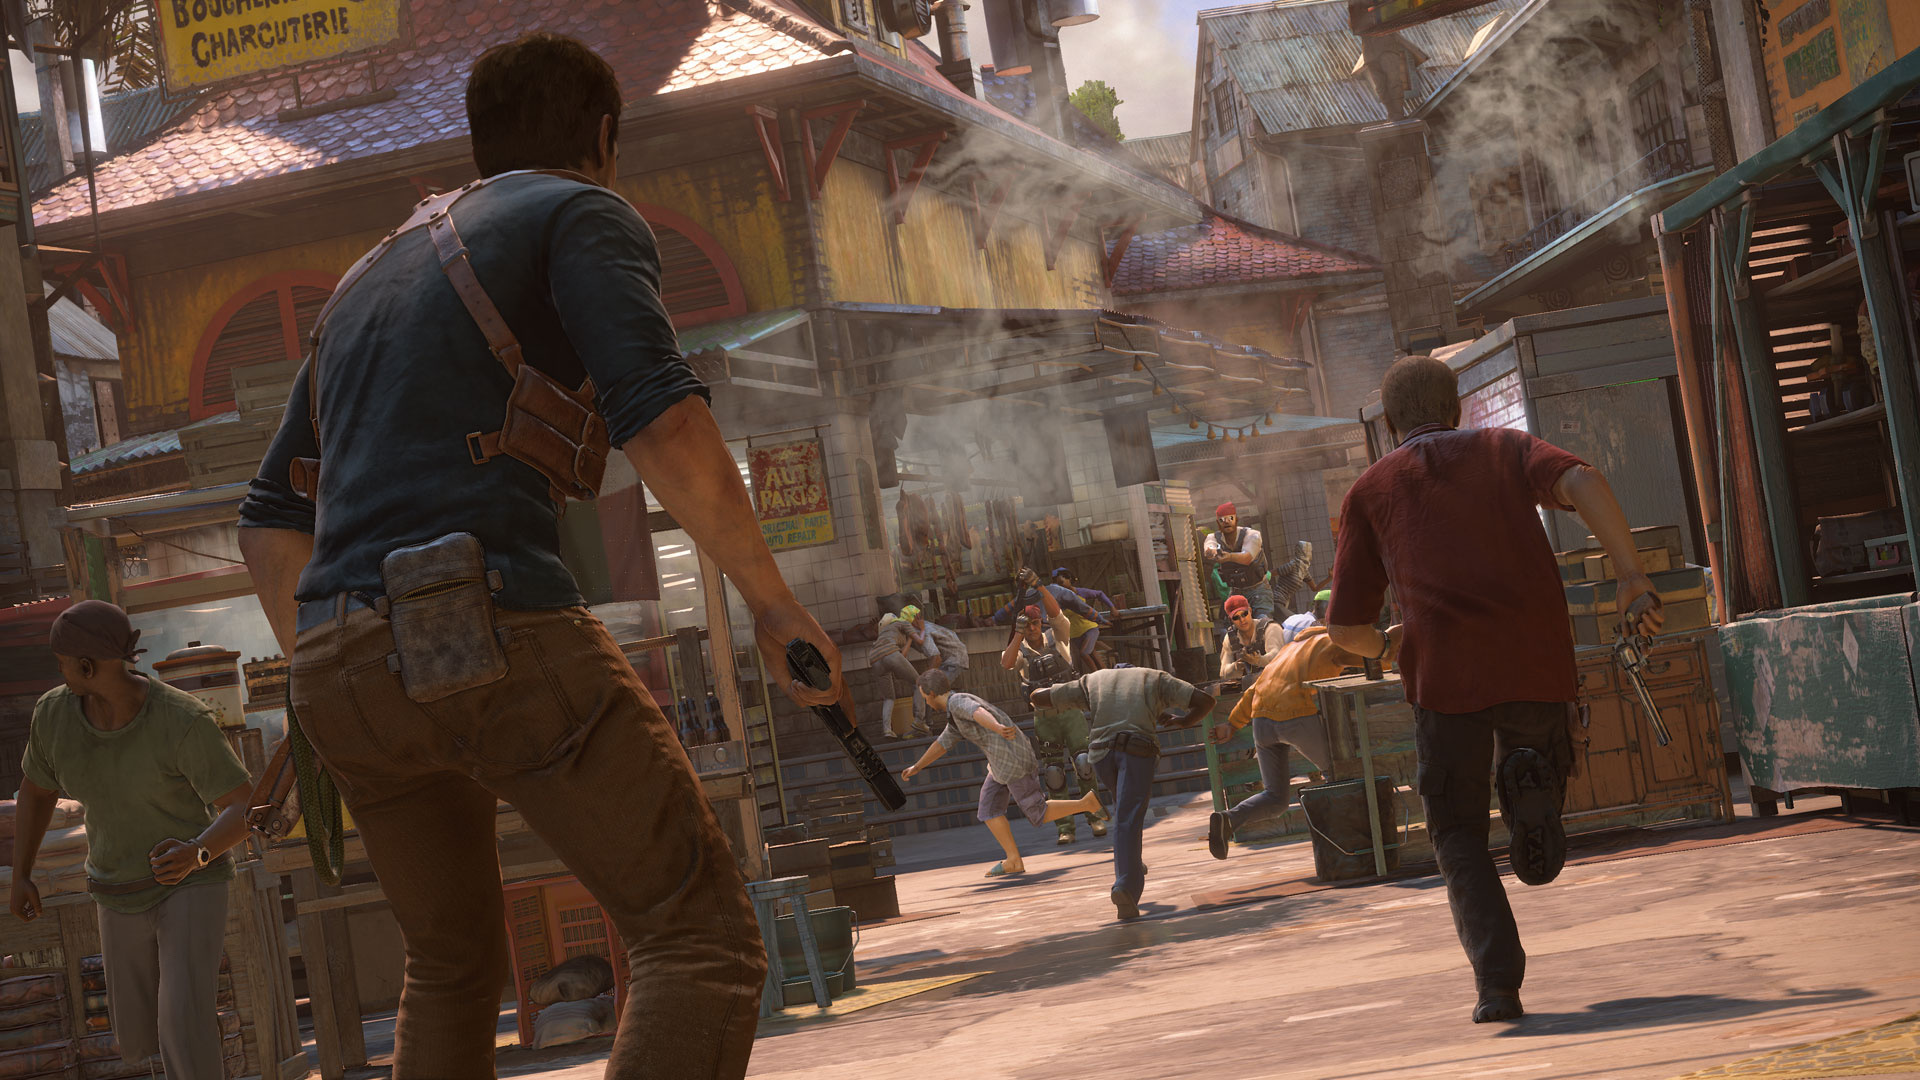 Uncharted 4: A Thief's End (PS4 / PlayStation 4) Game Profile | News